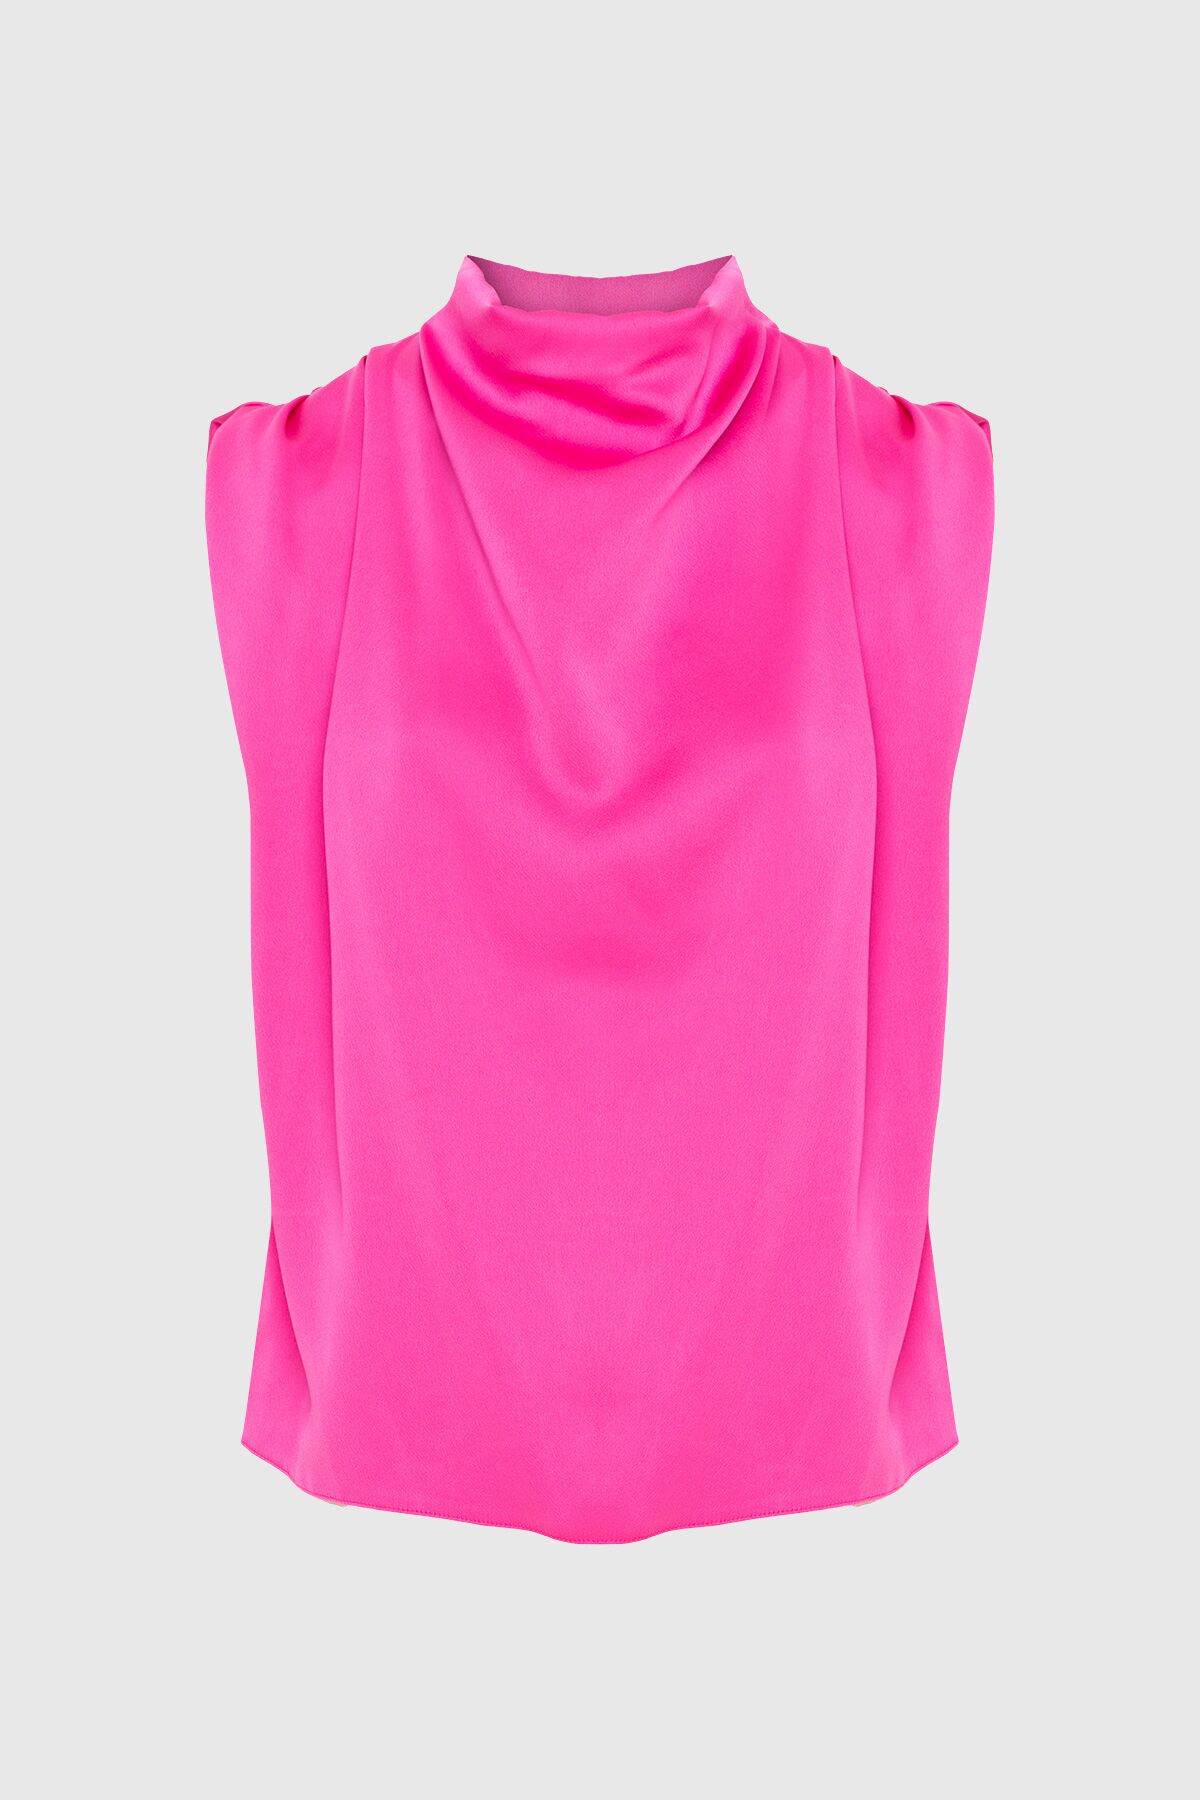 4G CLASSIC - Plunging Collar Zero Sleeve Pink Blouse